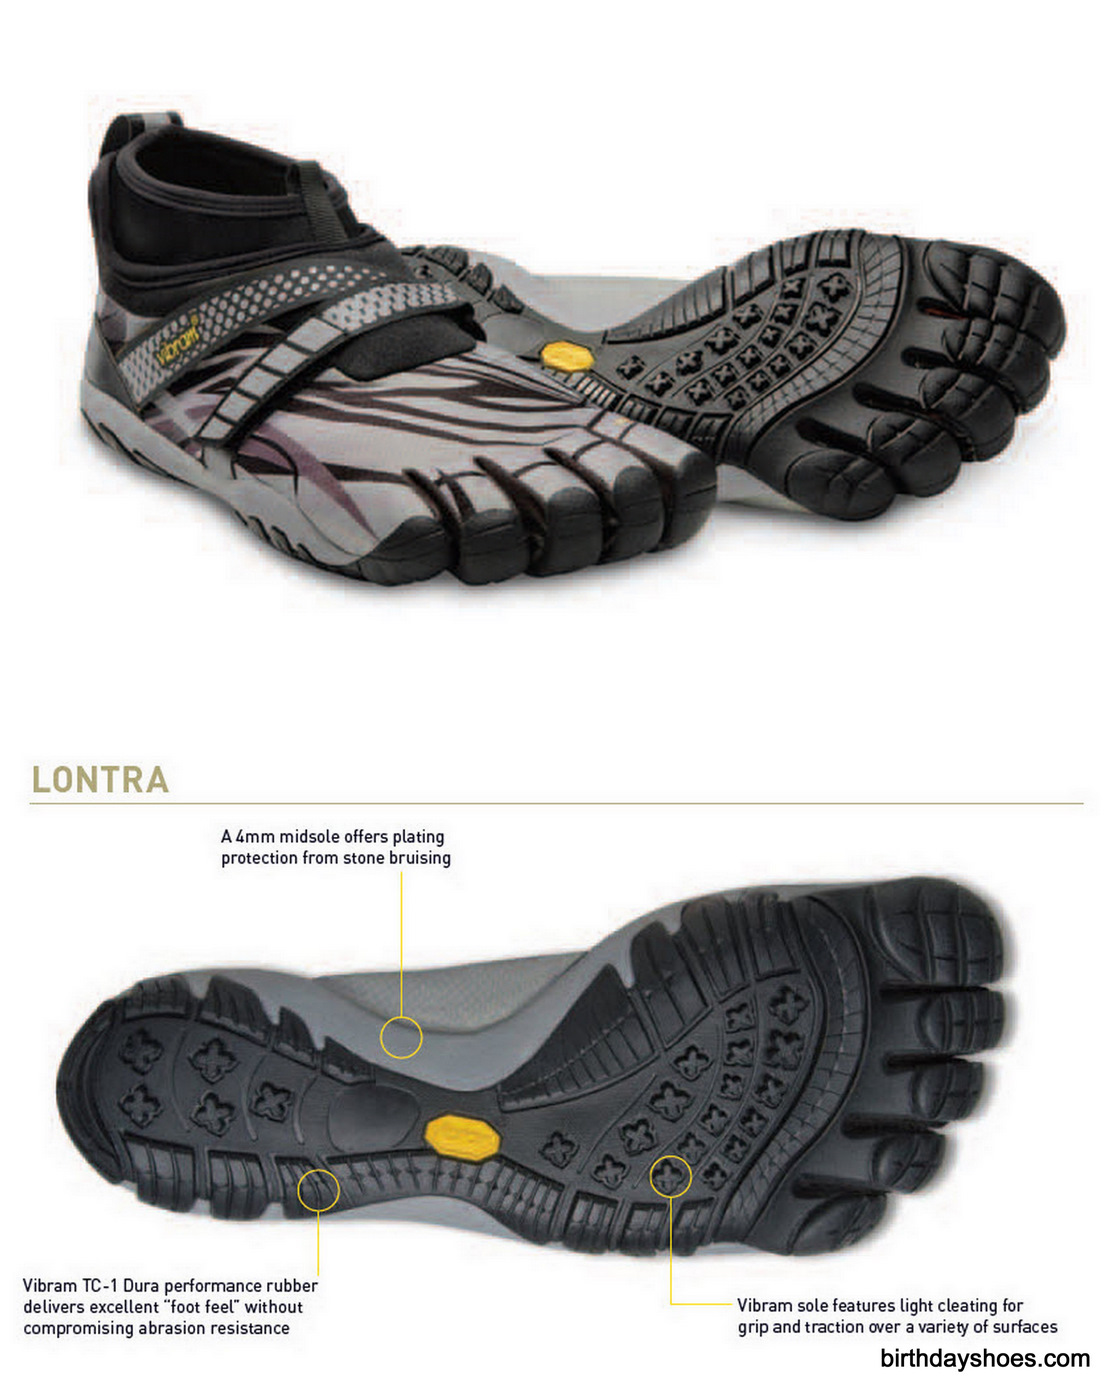 The FiveFingers Lontra features a Trek sole for traction and insulation against the cold.